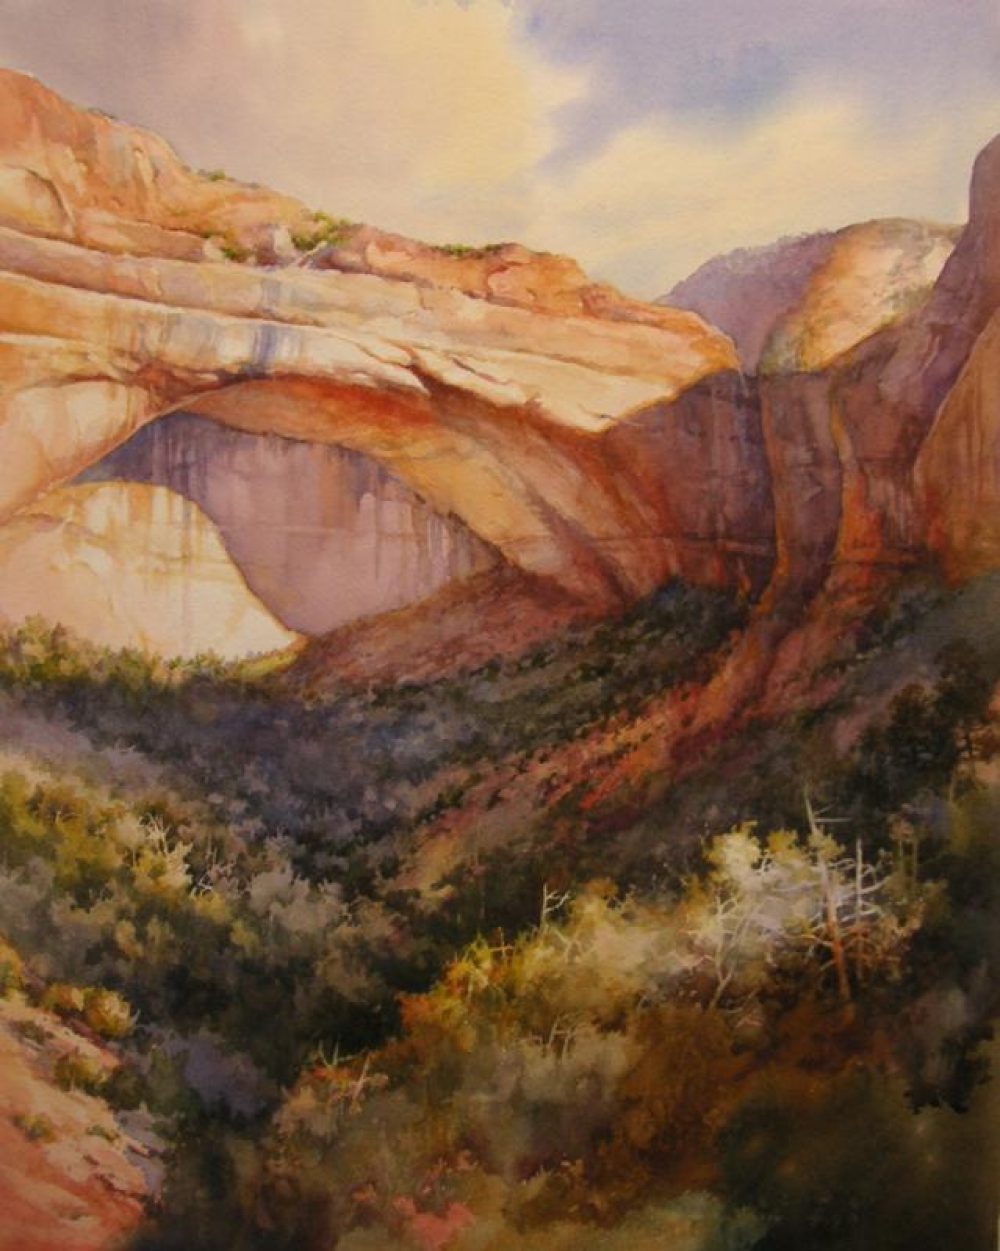 Zion's Great Arch - Watercolor Painting of the Great Arch in Zion National Park by Roland Lee